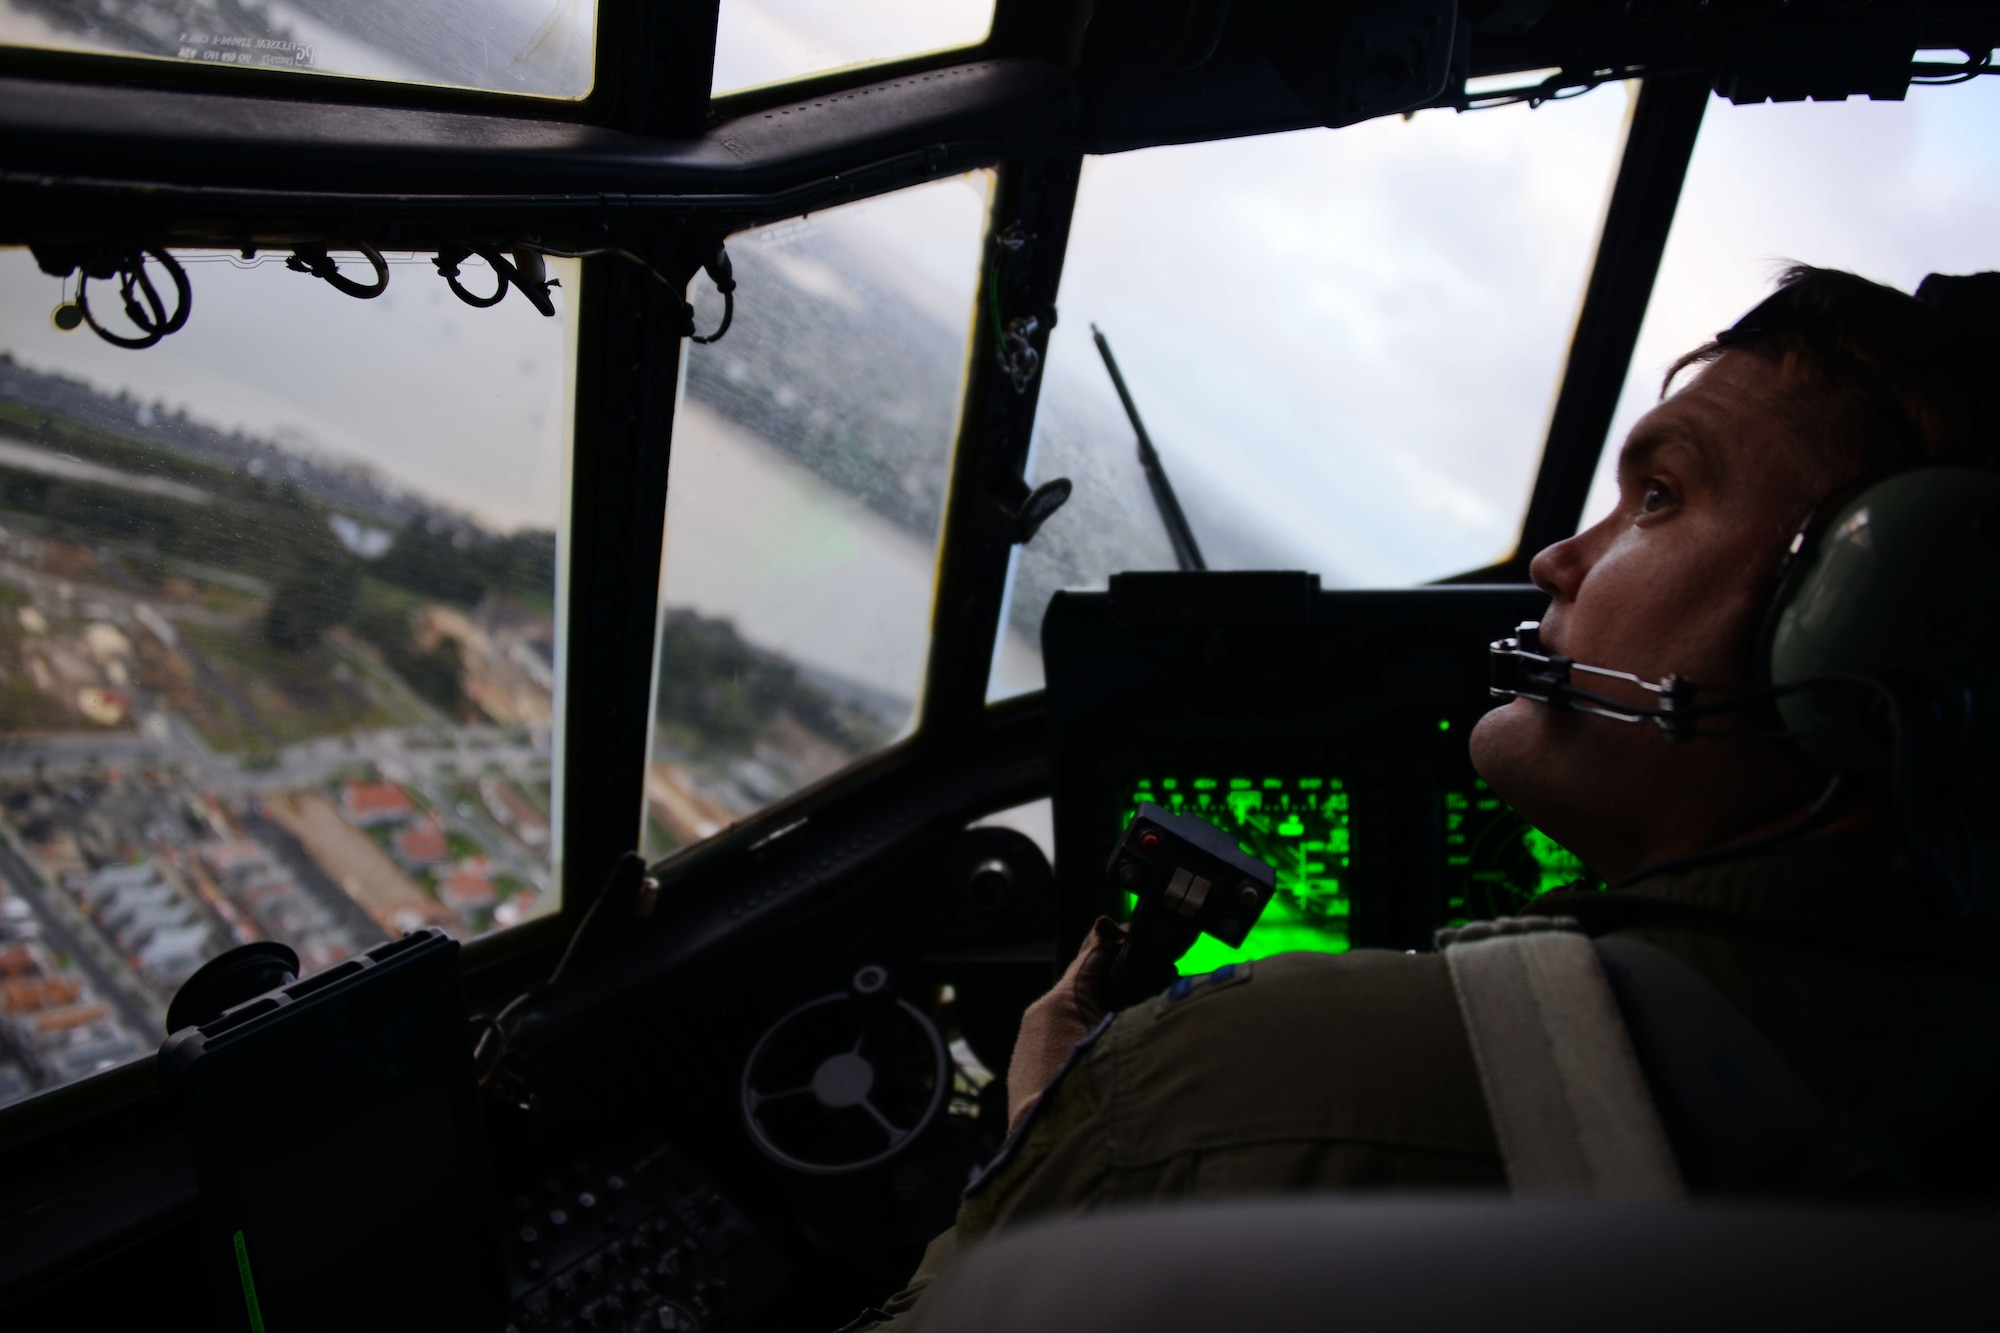 A 1st Special Operations Squadron pilot flies an MC-130H Combat Talon II and puts eyes on a Royal New Zealand Air Force C-130 Hercules during a dissimilar formation low level flight June 23, 2016.  Members from the 353rd Special Operations Group participated in Exercise Teak Net June 12 through June 30 in Whenuapai, New Zealand. During the exercise, members from both the New Zealand Defense Force and U.S. Air Force worked together to conduct personnel and equipment air drops together while exchanging new techniques. (U.S. Air Force photo by Master Sgt. Kristine Dreyer)